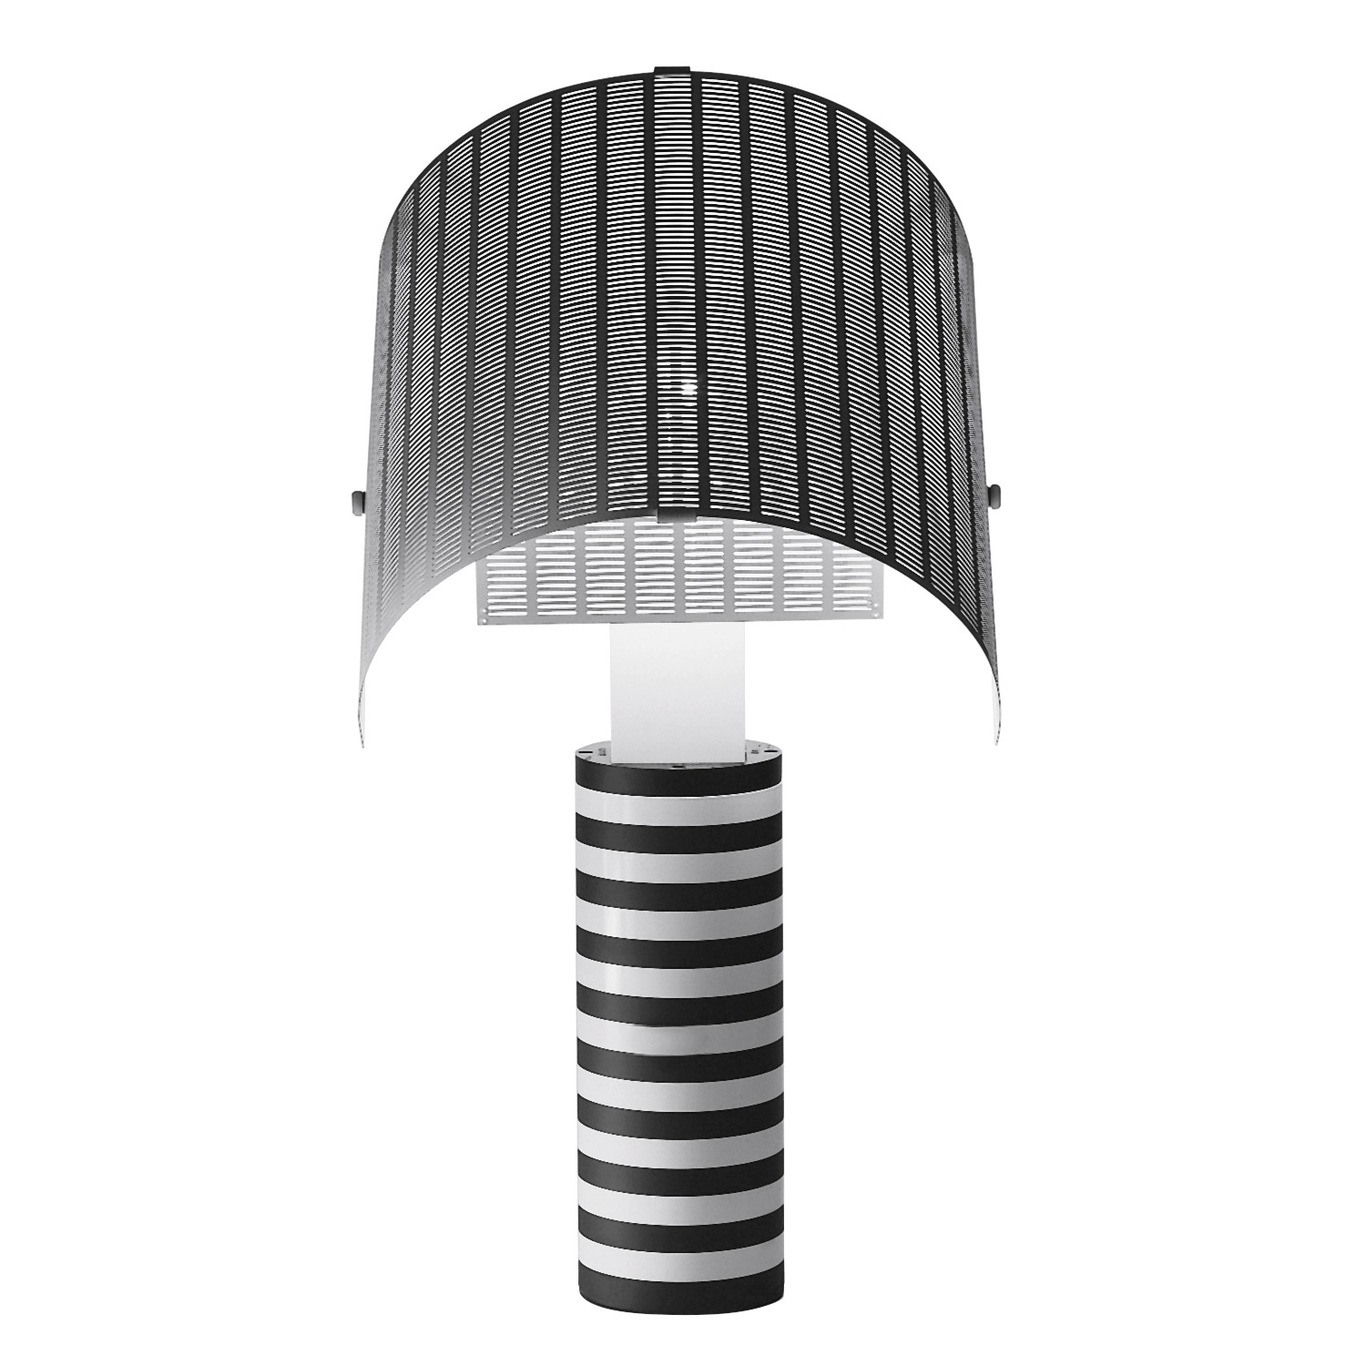 Sho Table Lamp Black White, Black And White Striped Lamp Shade